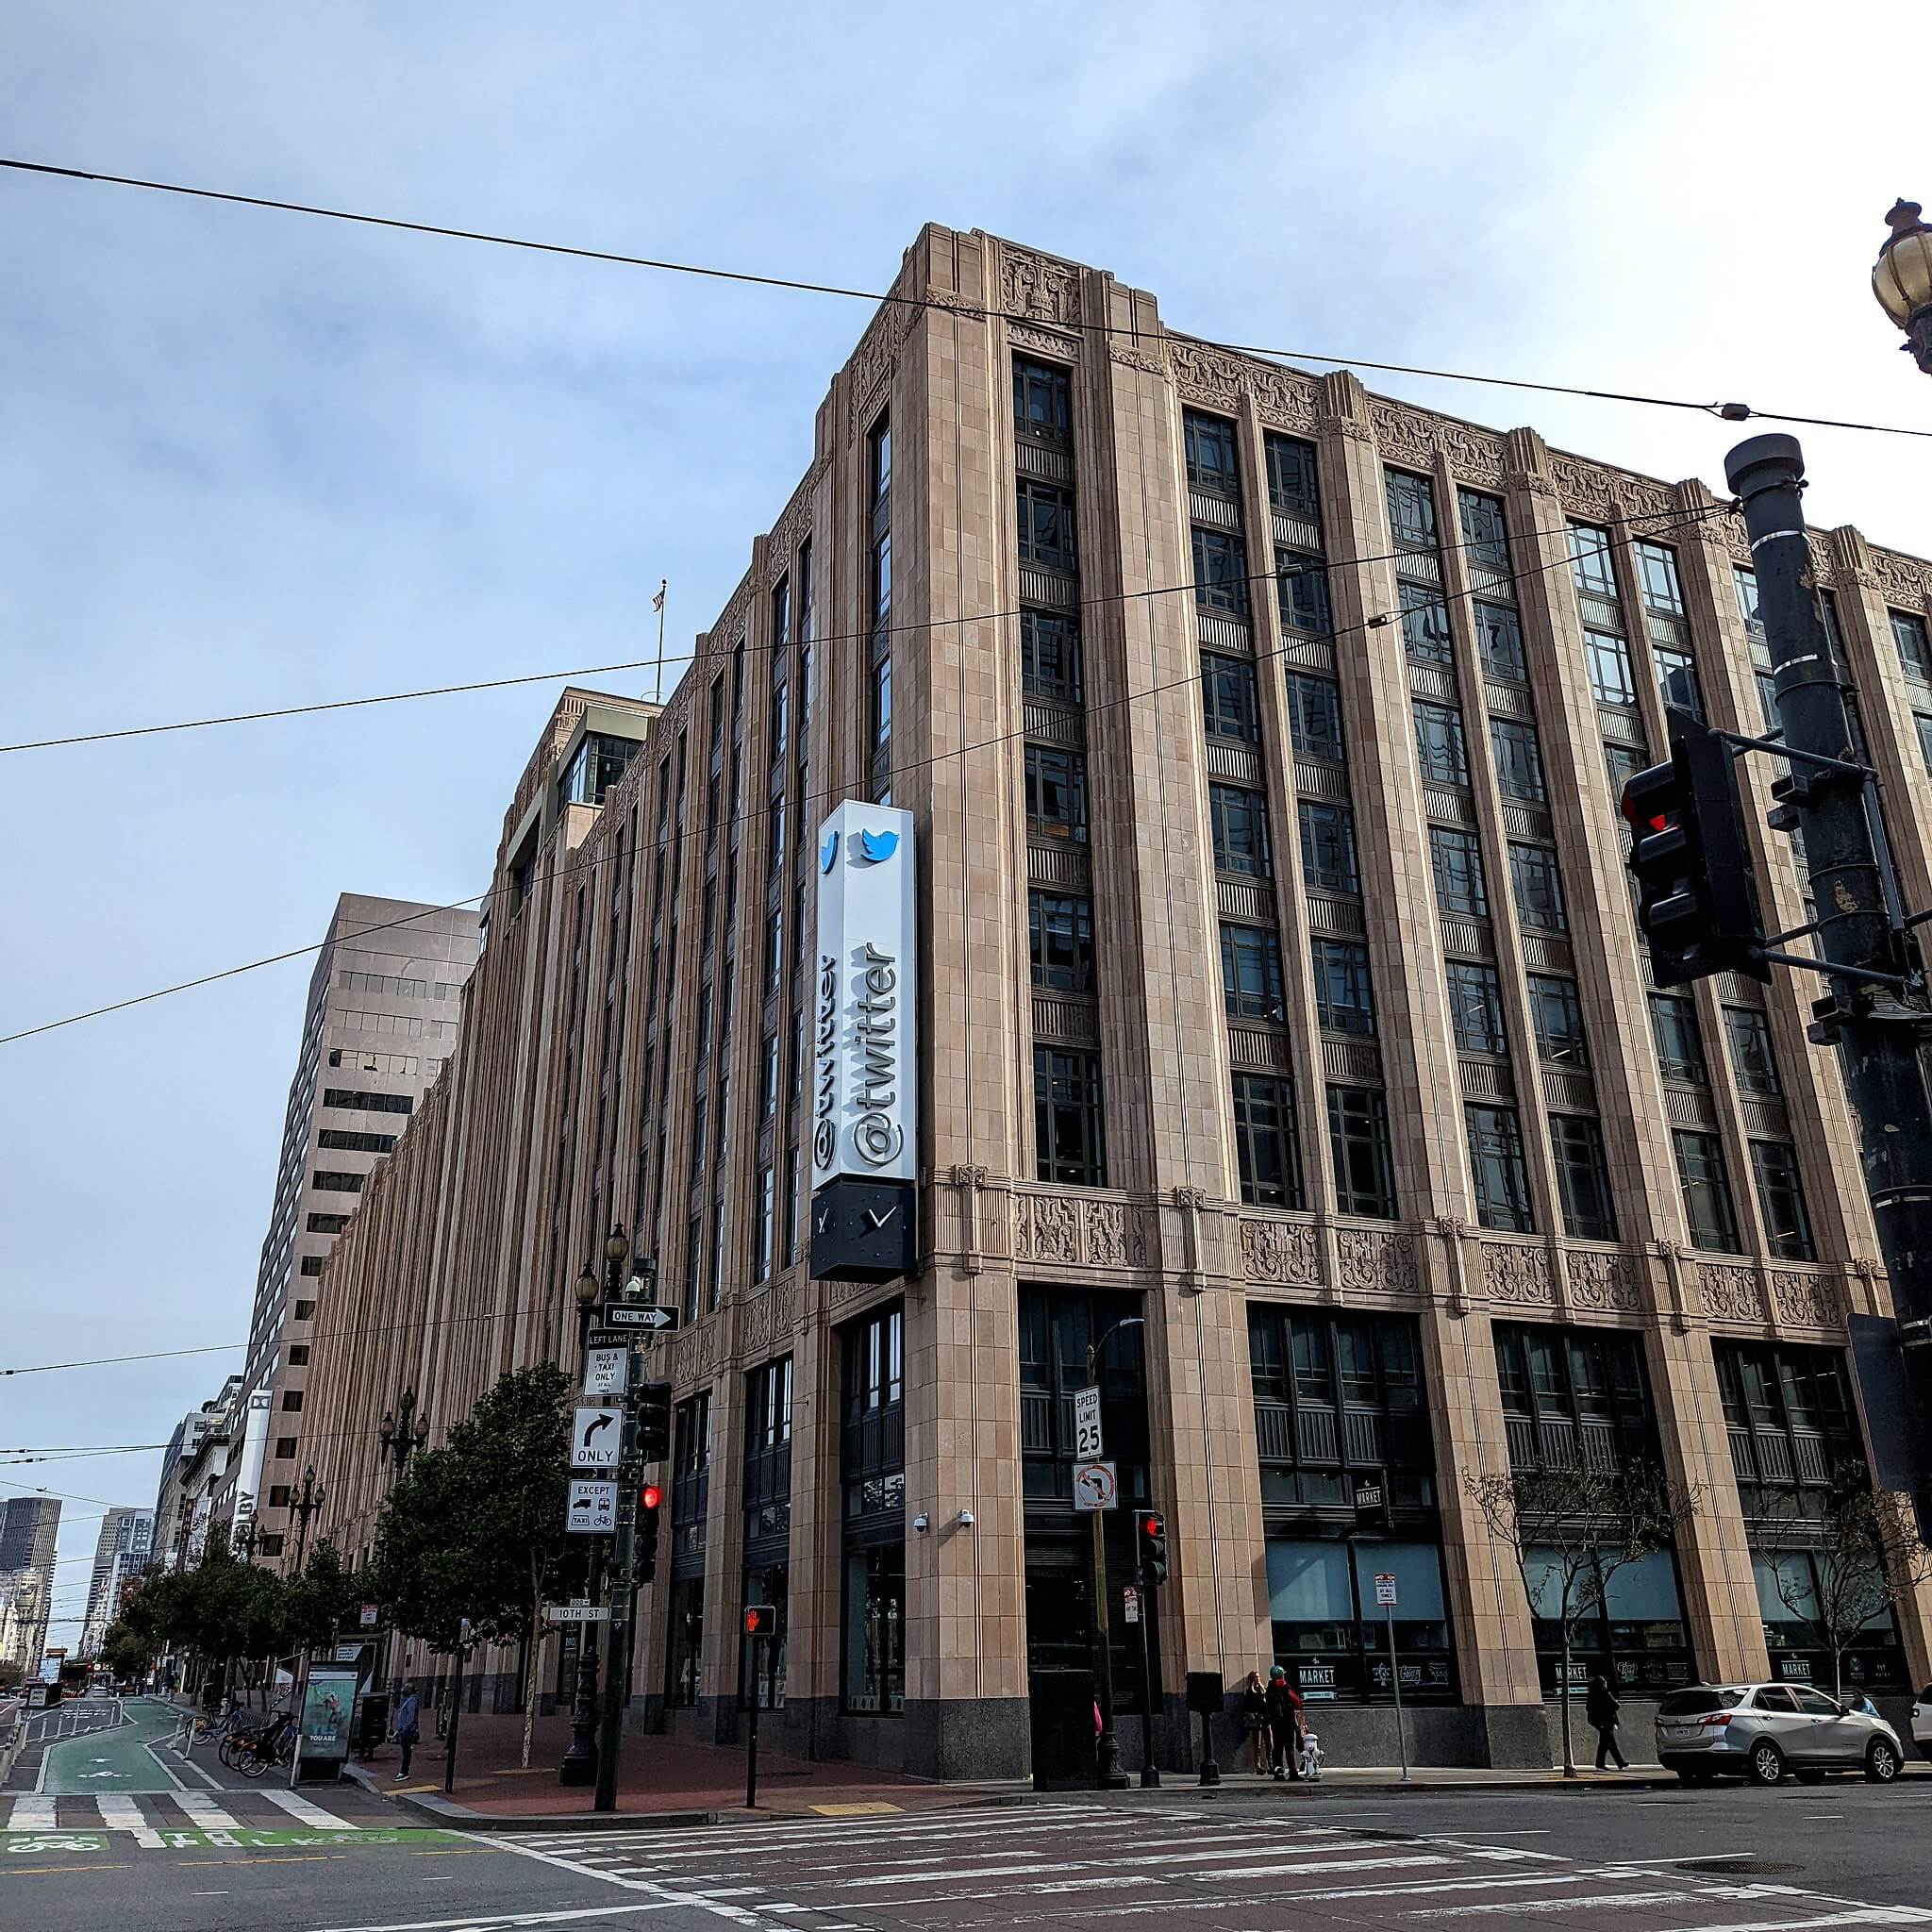 San Francisco says Twitter needs permits for its office bedrooms